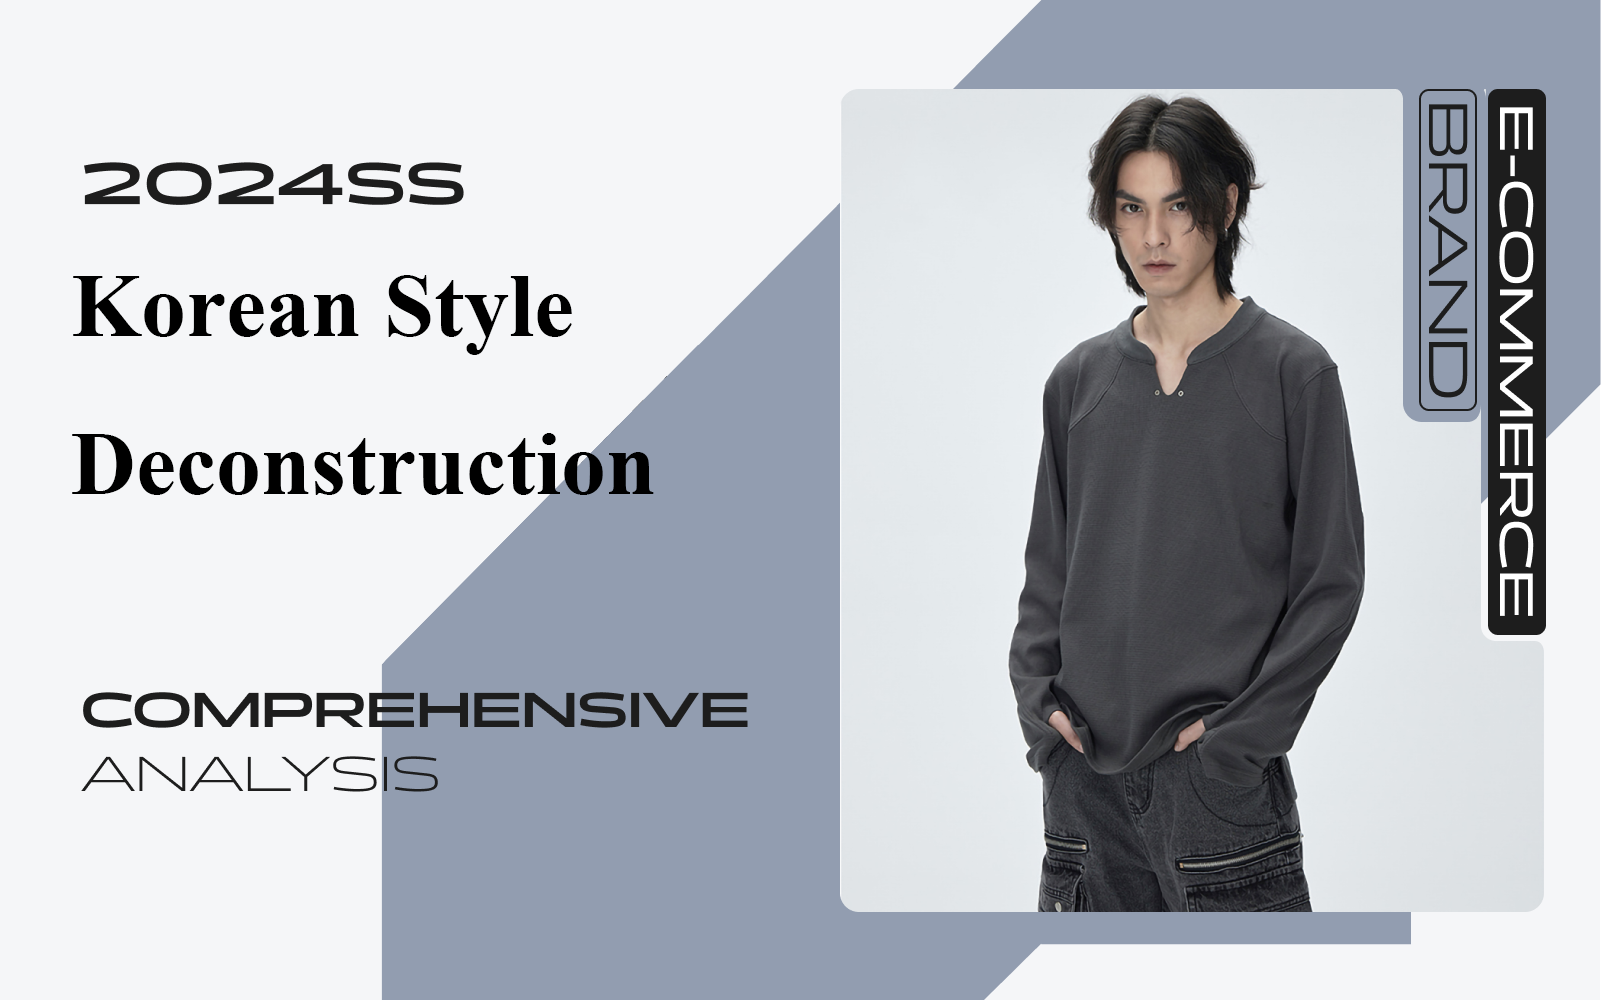 Korean Style Deconstruction -- The Comprehensive Analysis of Menswear E-commerce Brands